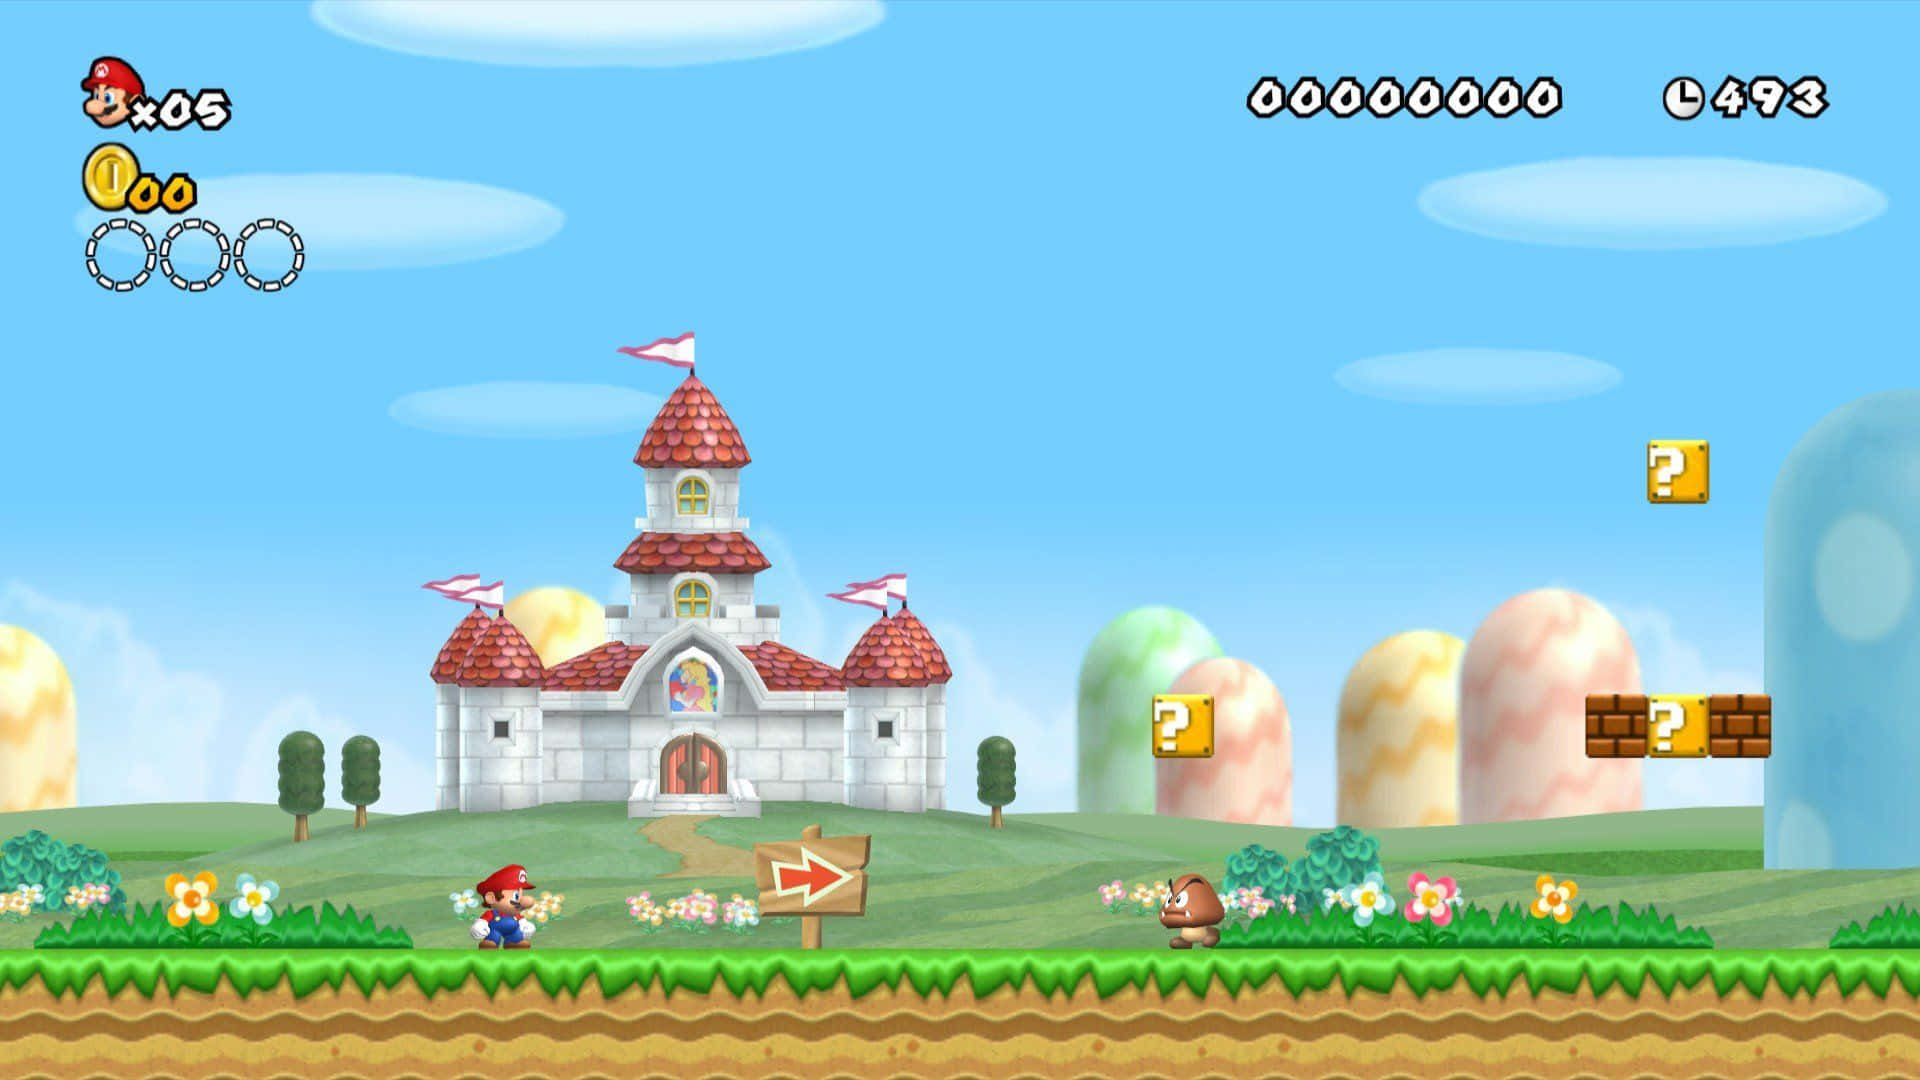 Welcome to the picturesque Mushroom Kingdom! Wallpaper